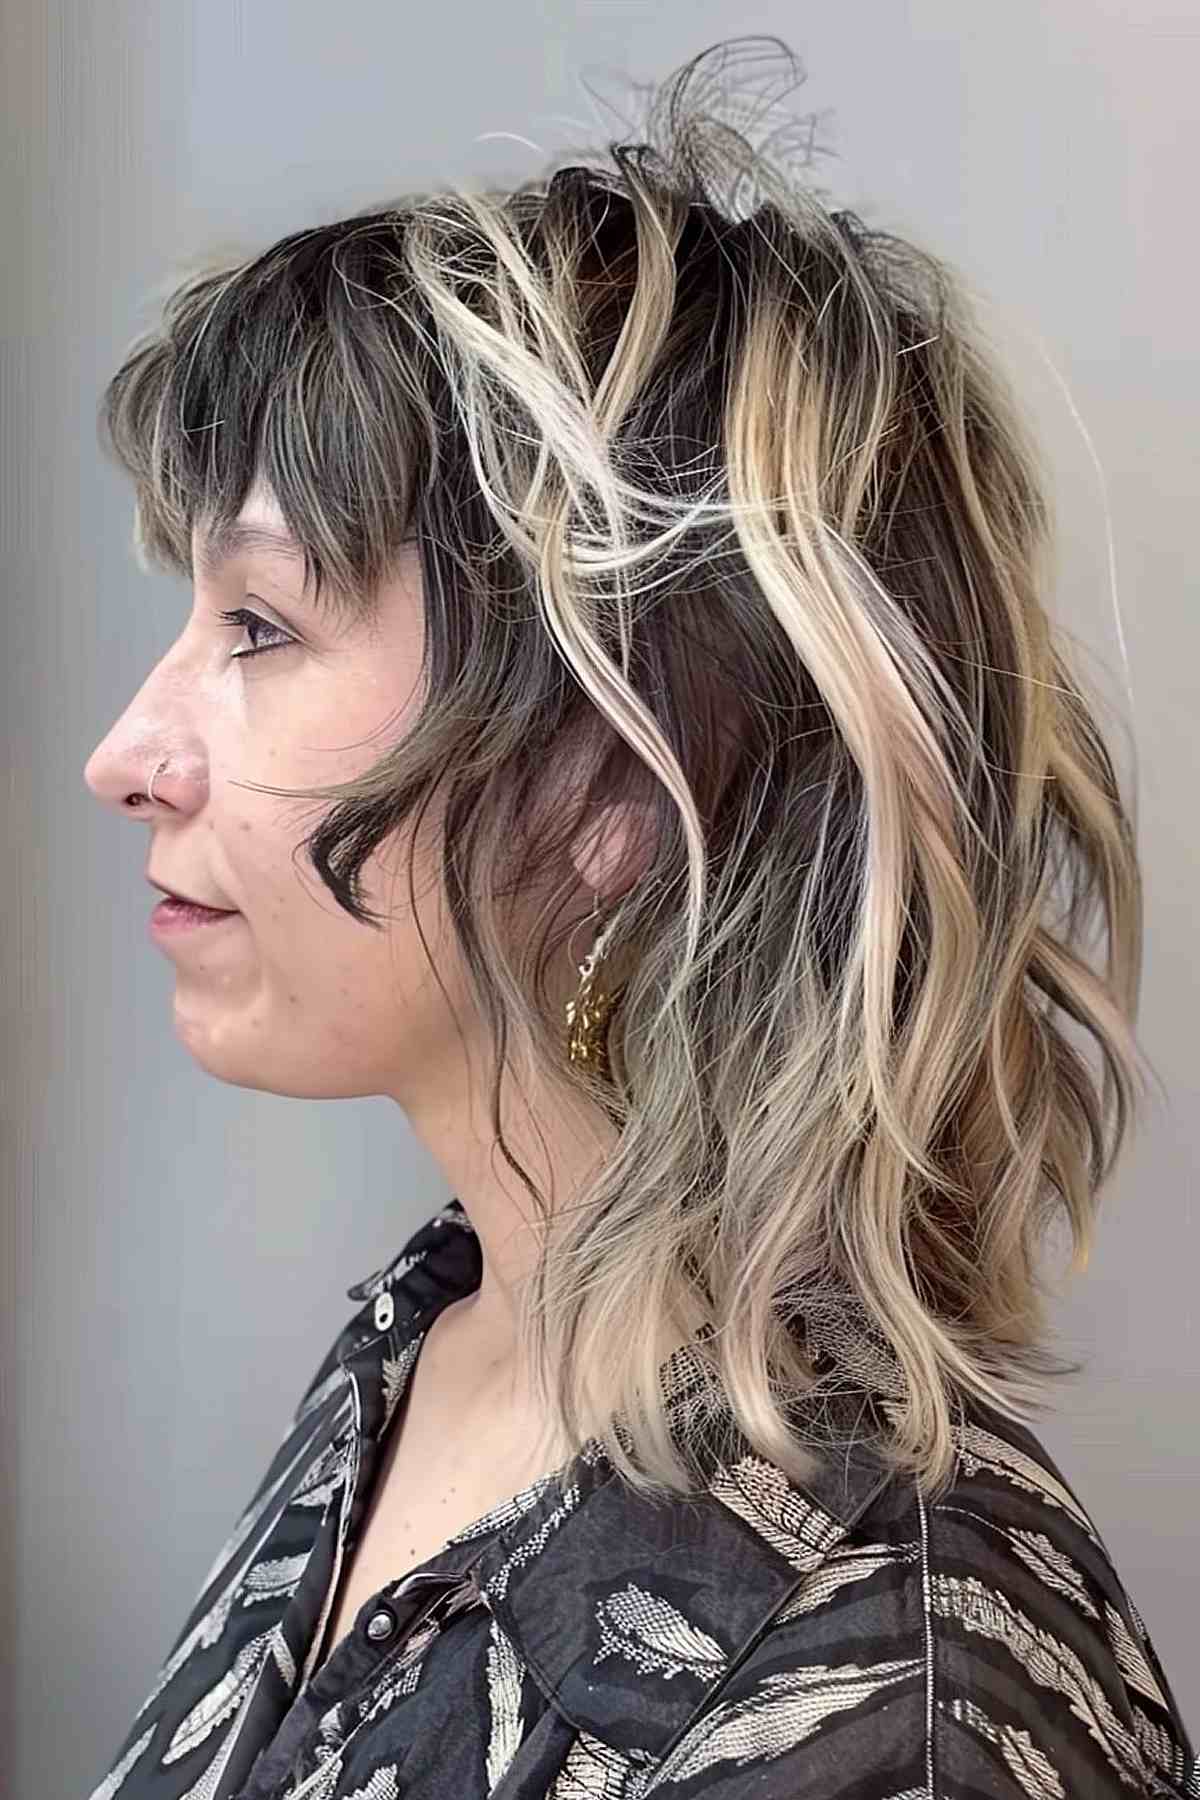 Mullet cut with dark hair and chunky blonde highlights